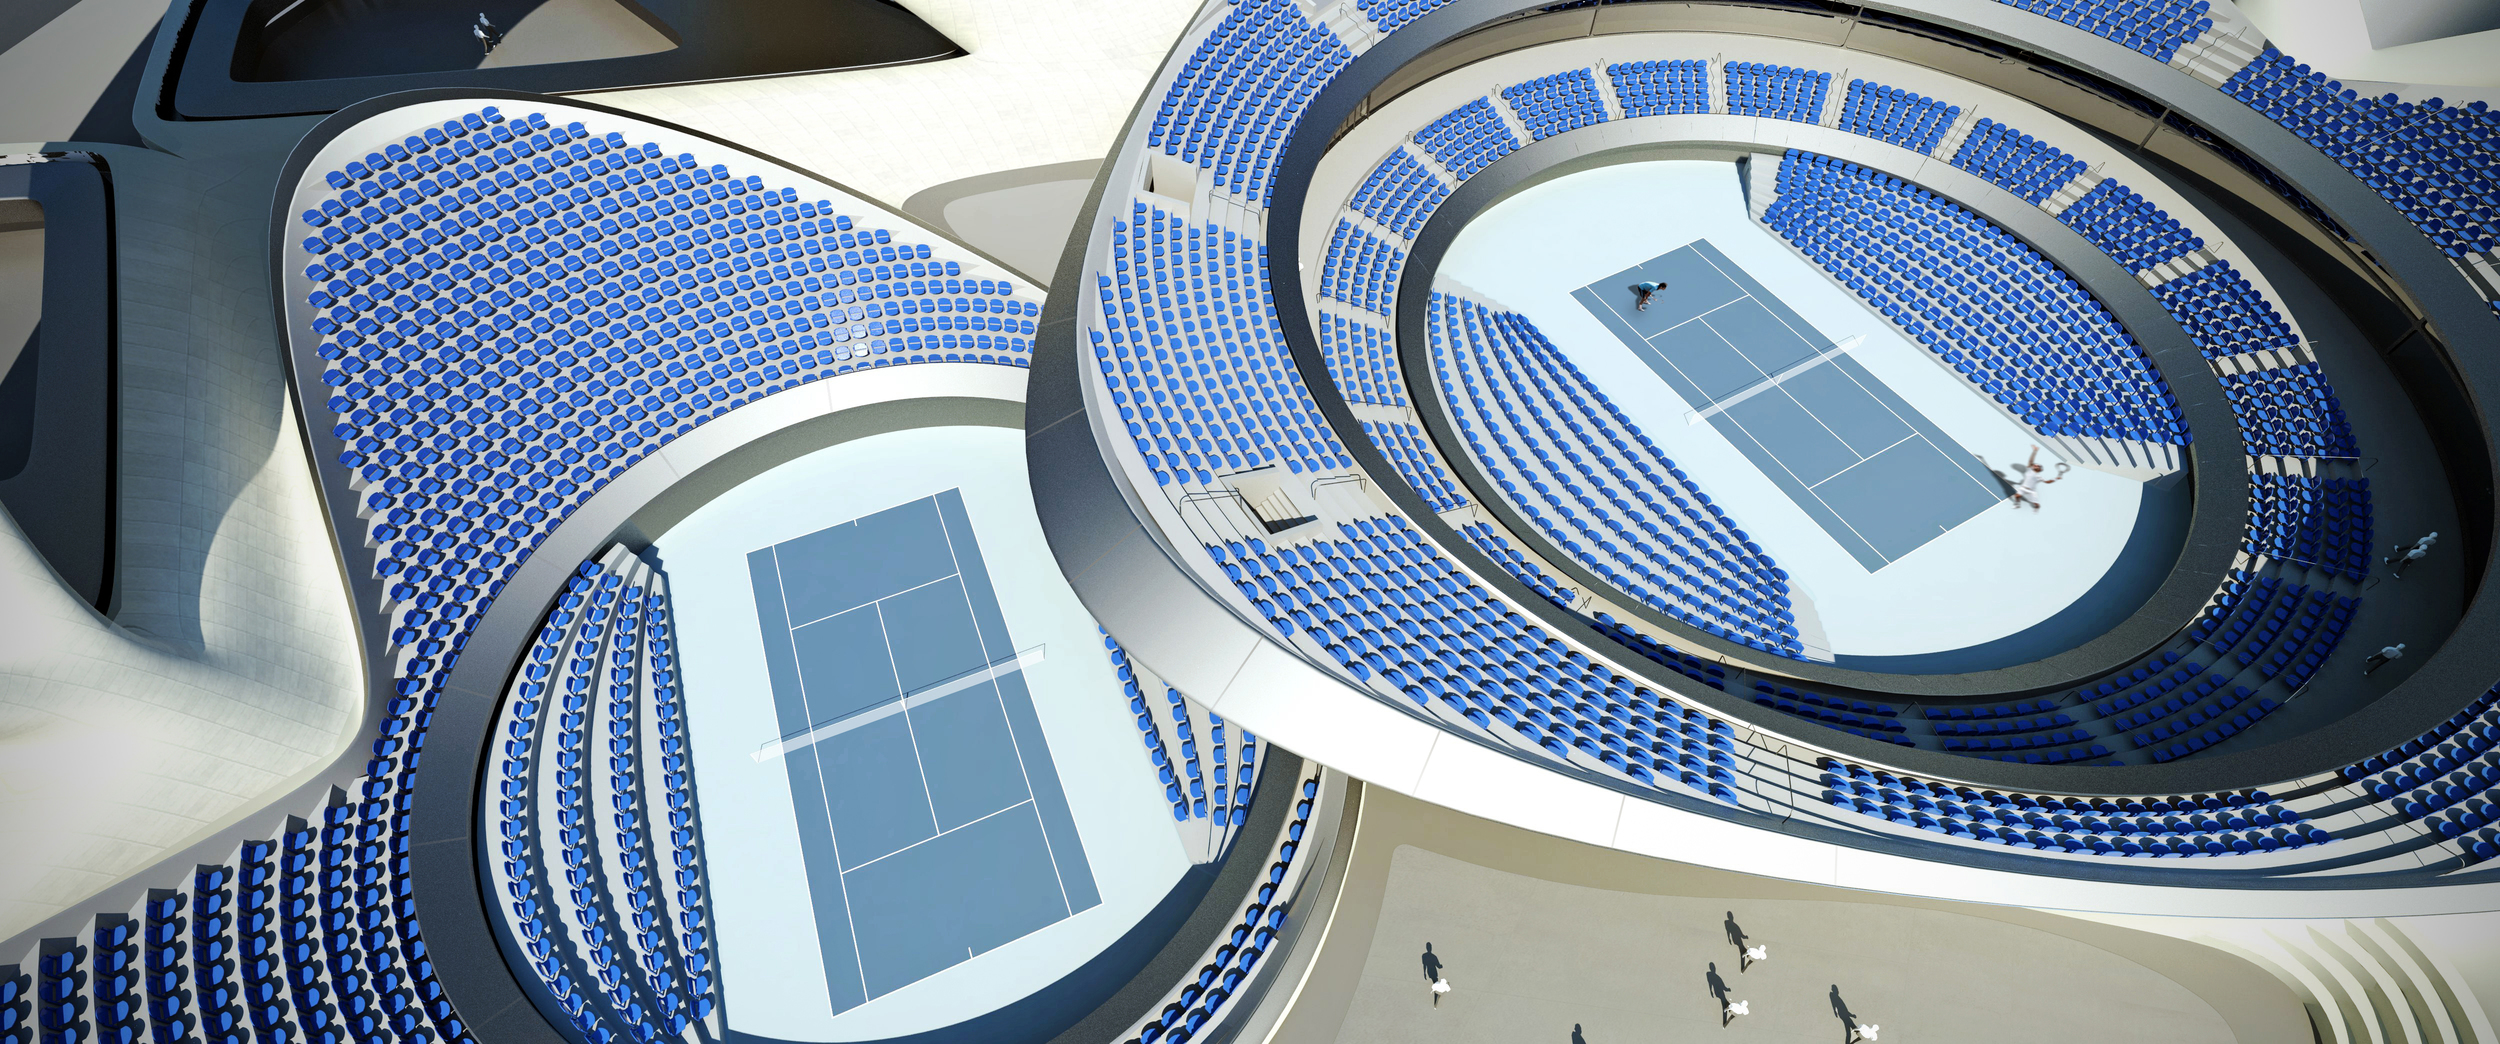  In plan view, the two largest internal tension rings correspond to the two olympic tennis courts below. One of these courts holds the main event, while the other court hosts secondary events.  The third tension ring in the roof marks the main public